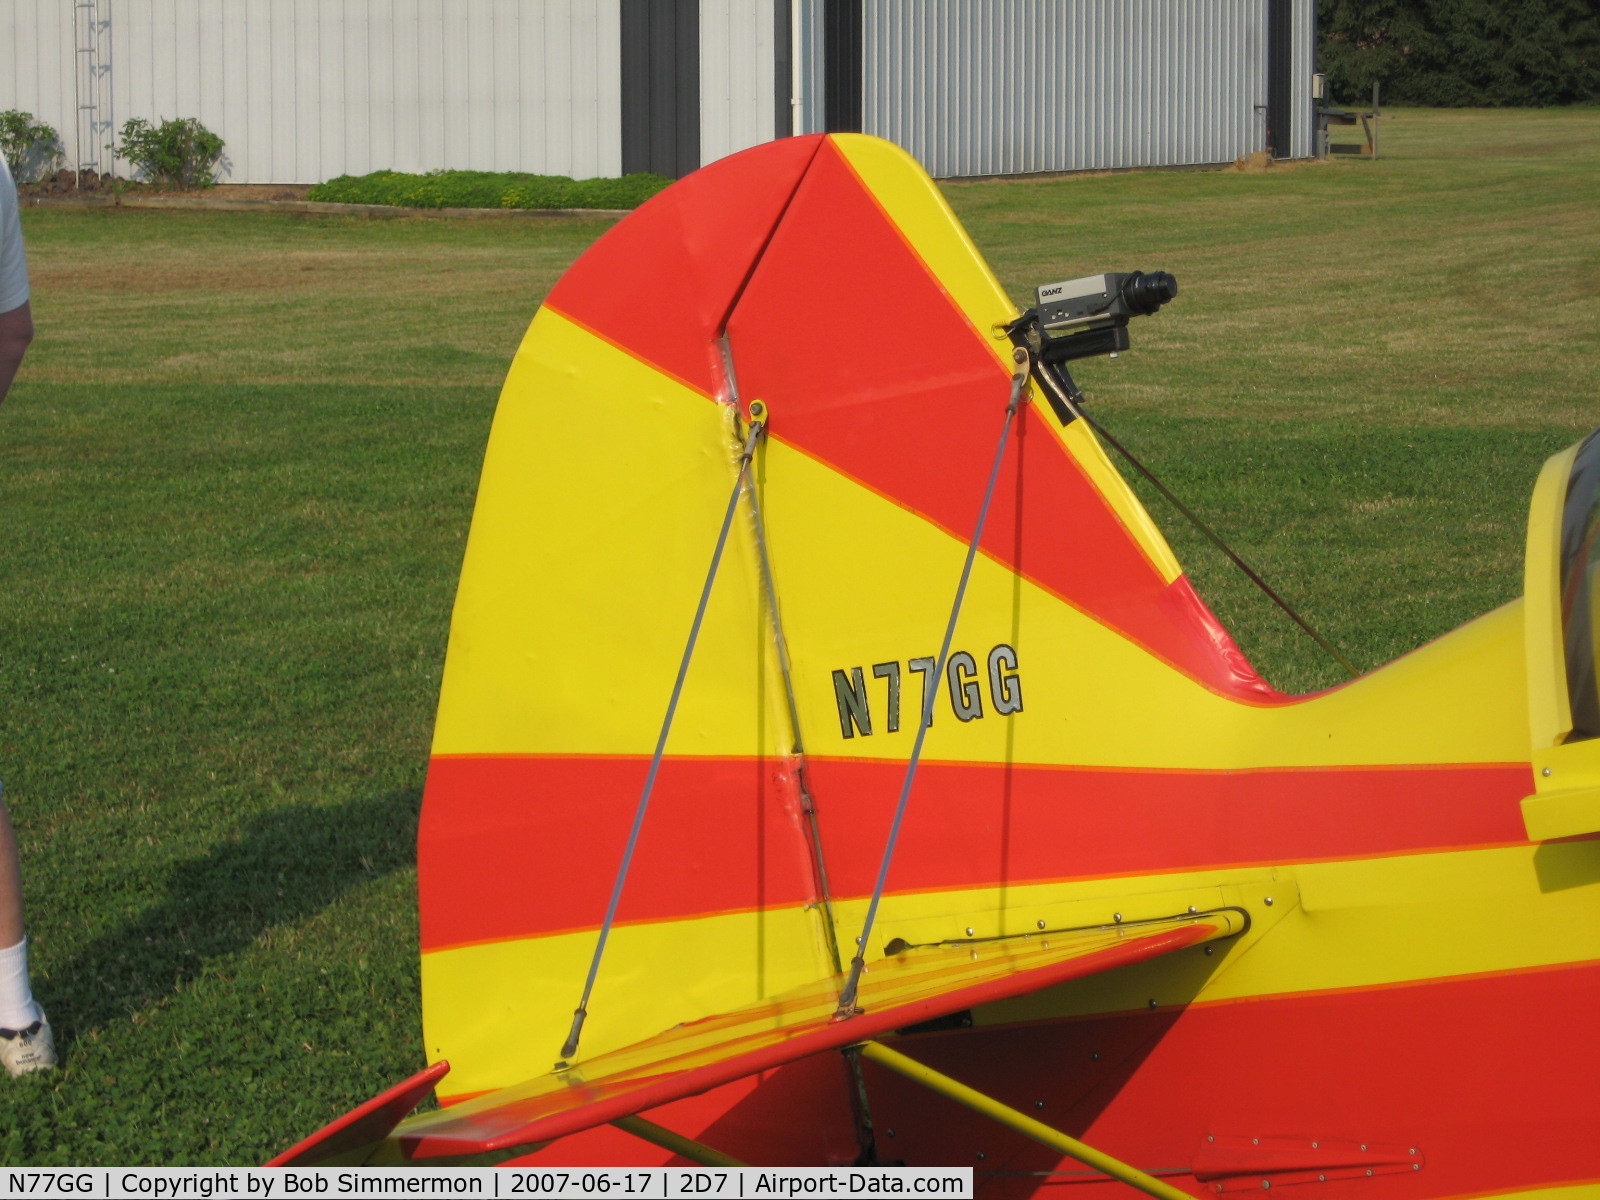 N77GG, 1979 Stolp SA-750 Acroduster Too C/N 1-77-BG, Beach City, OH fly-in.  Tail mounted camera.